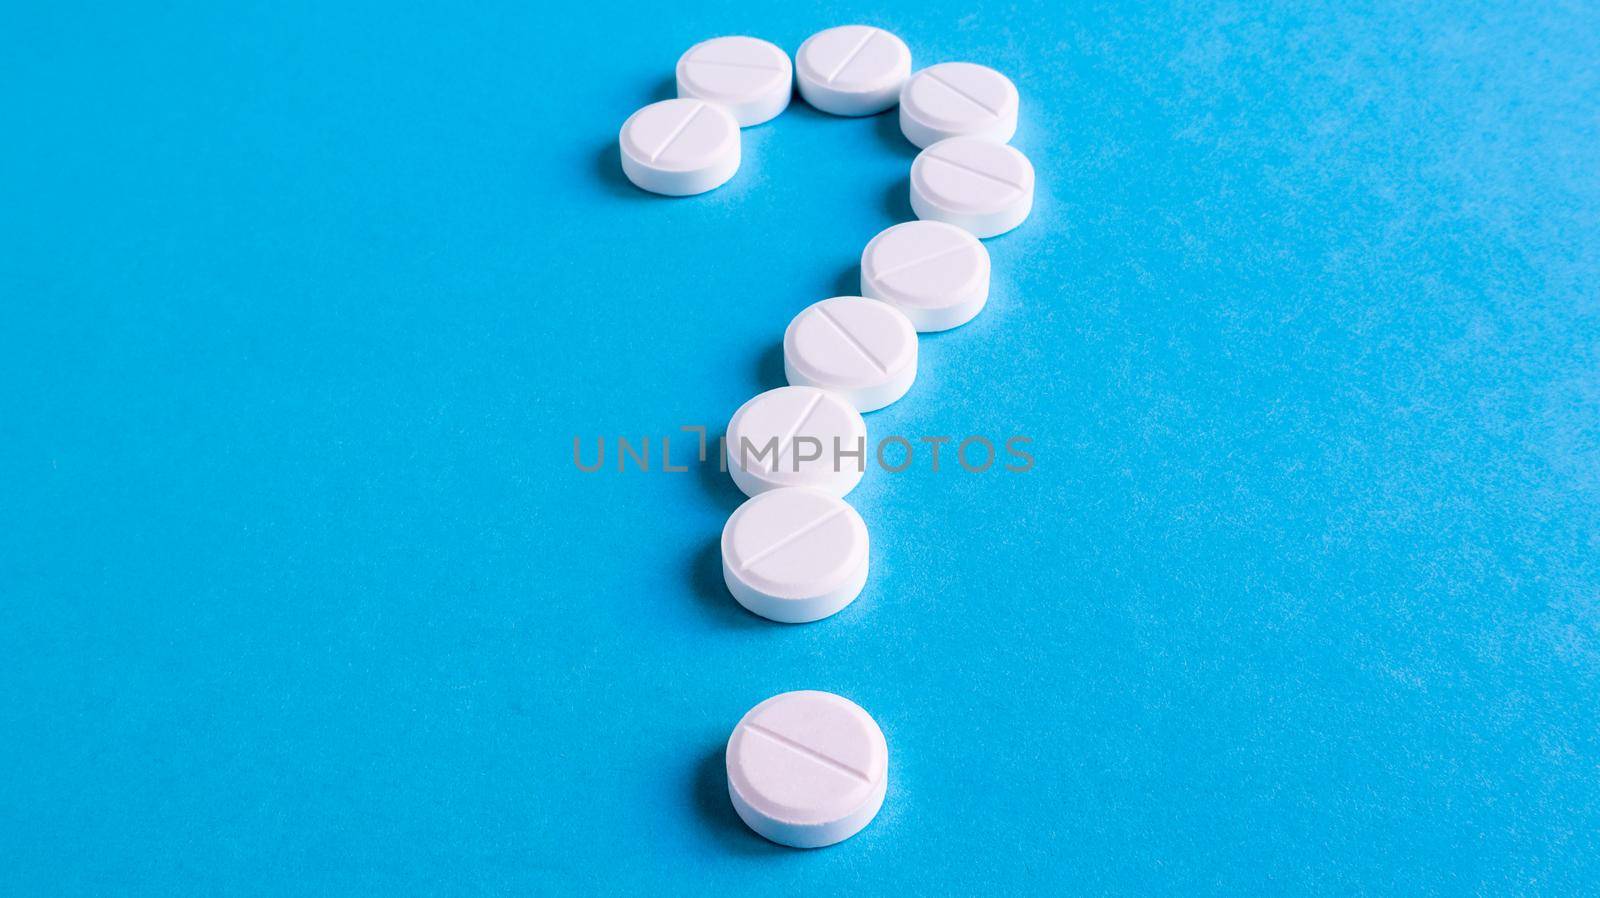 Question mark made of many white pills on a blue background. Healthcare concept. Creative medicine for health medical problem, drug interaction, medication error and pharmaceutical concept